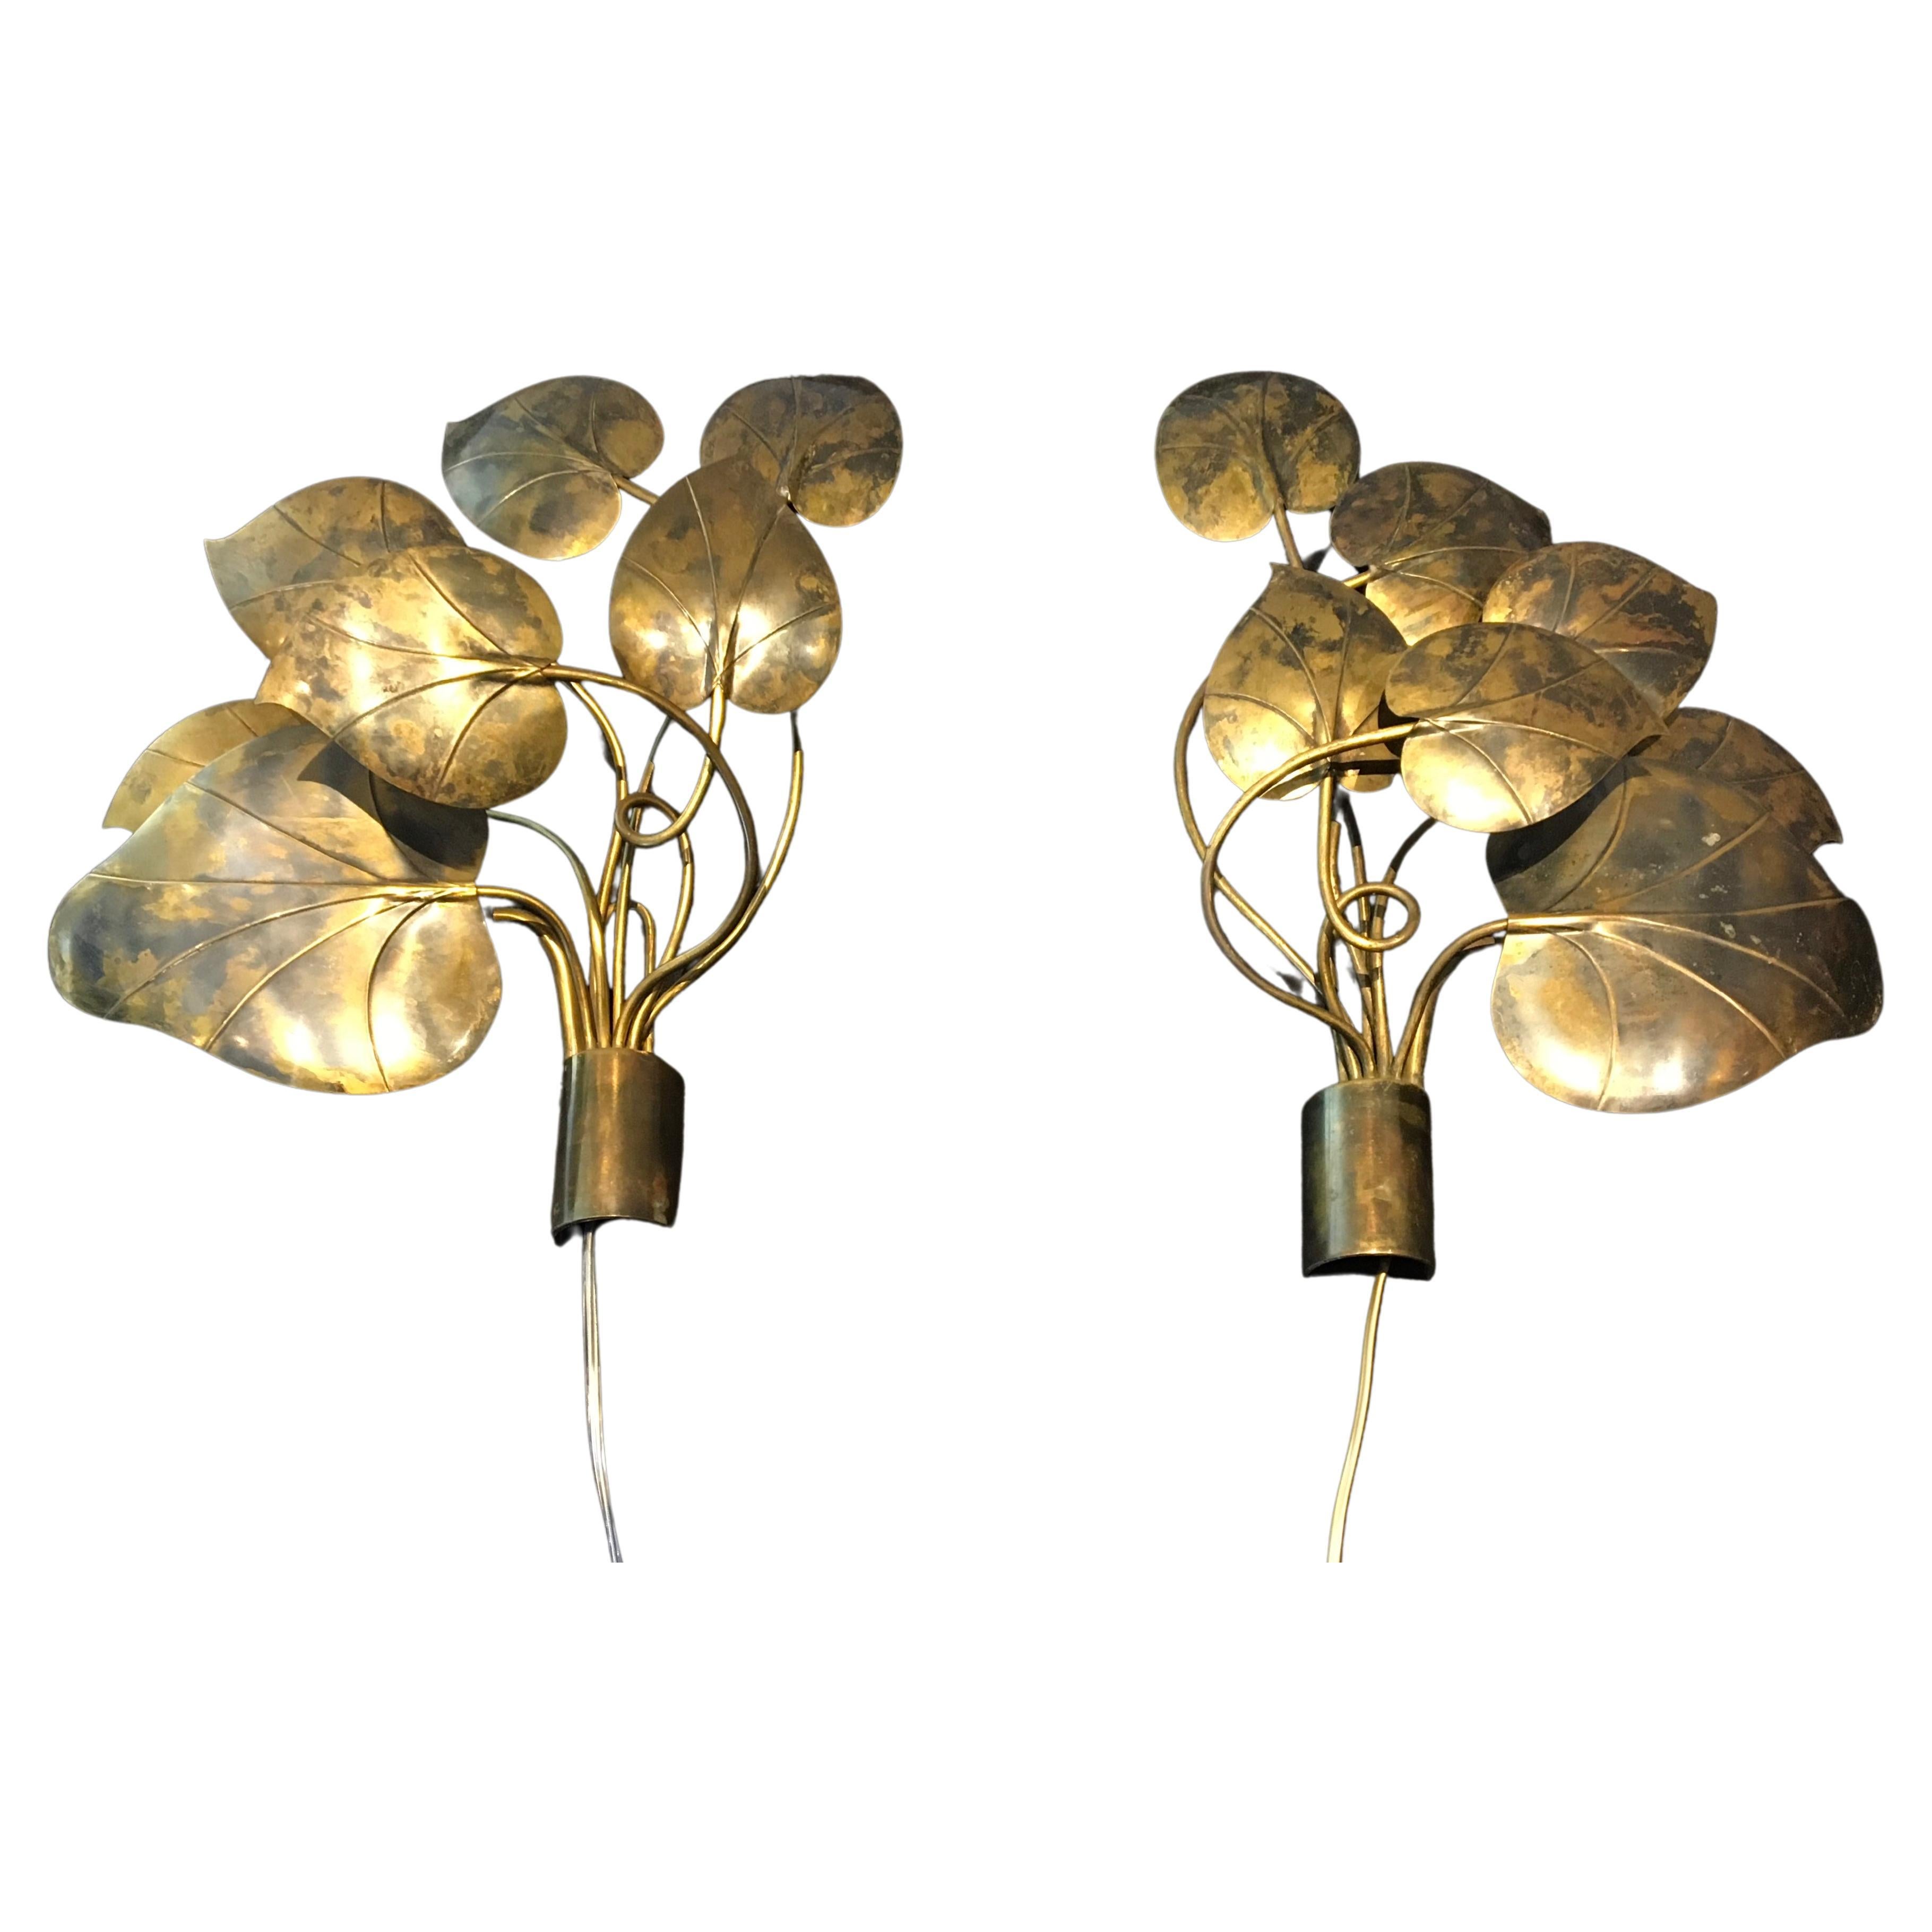 Pair of Leaf Wall Lights, 1970s